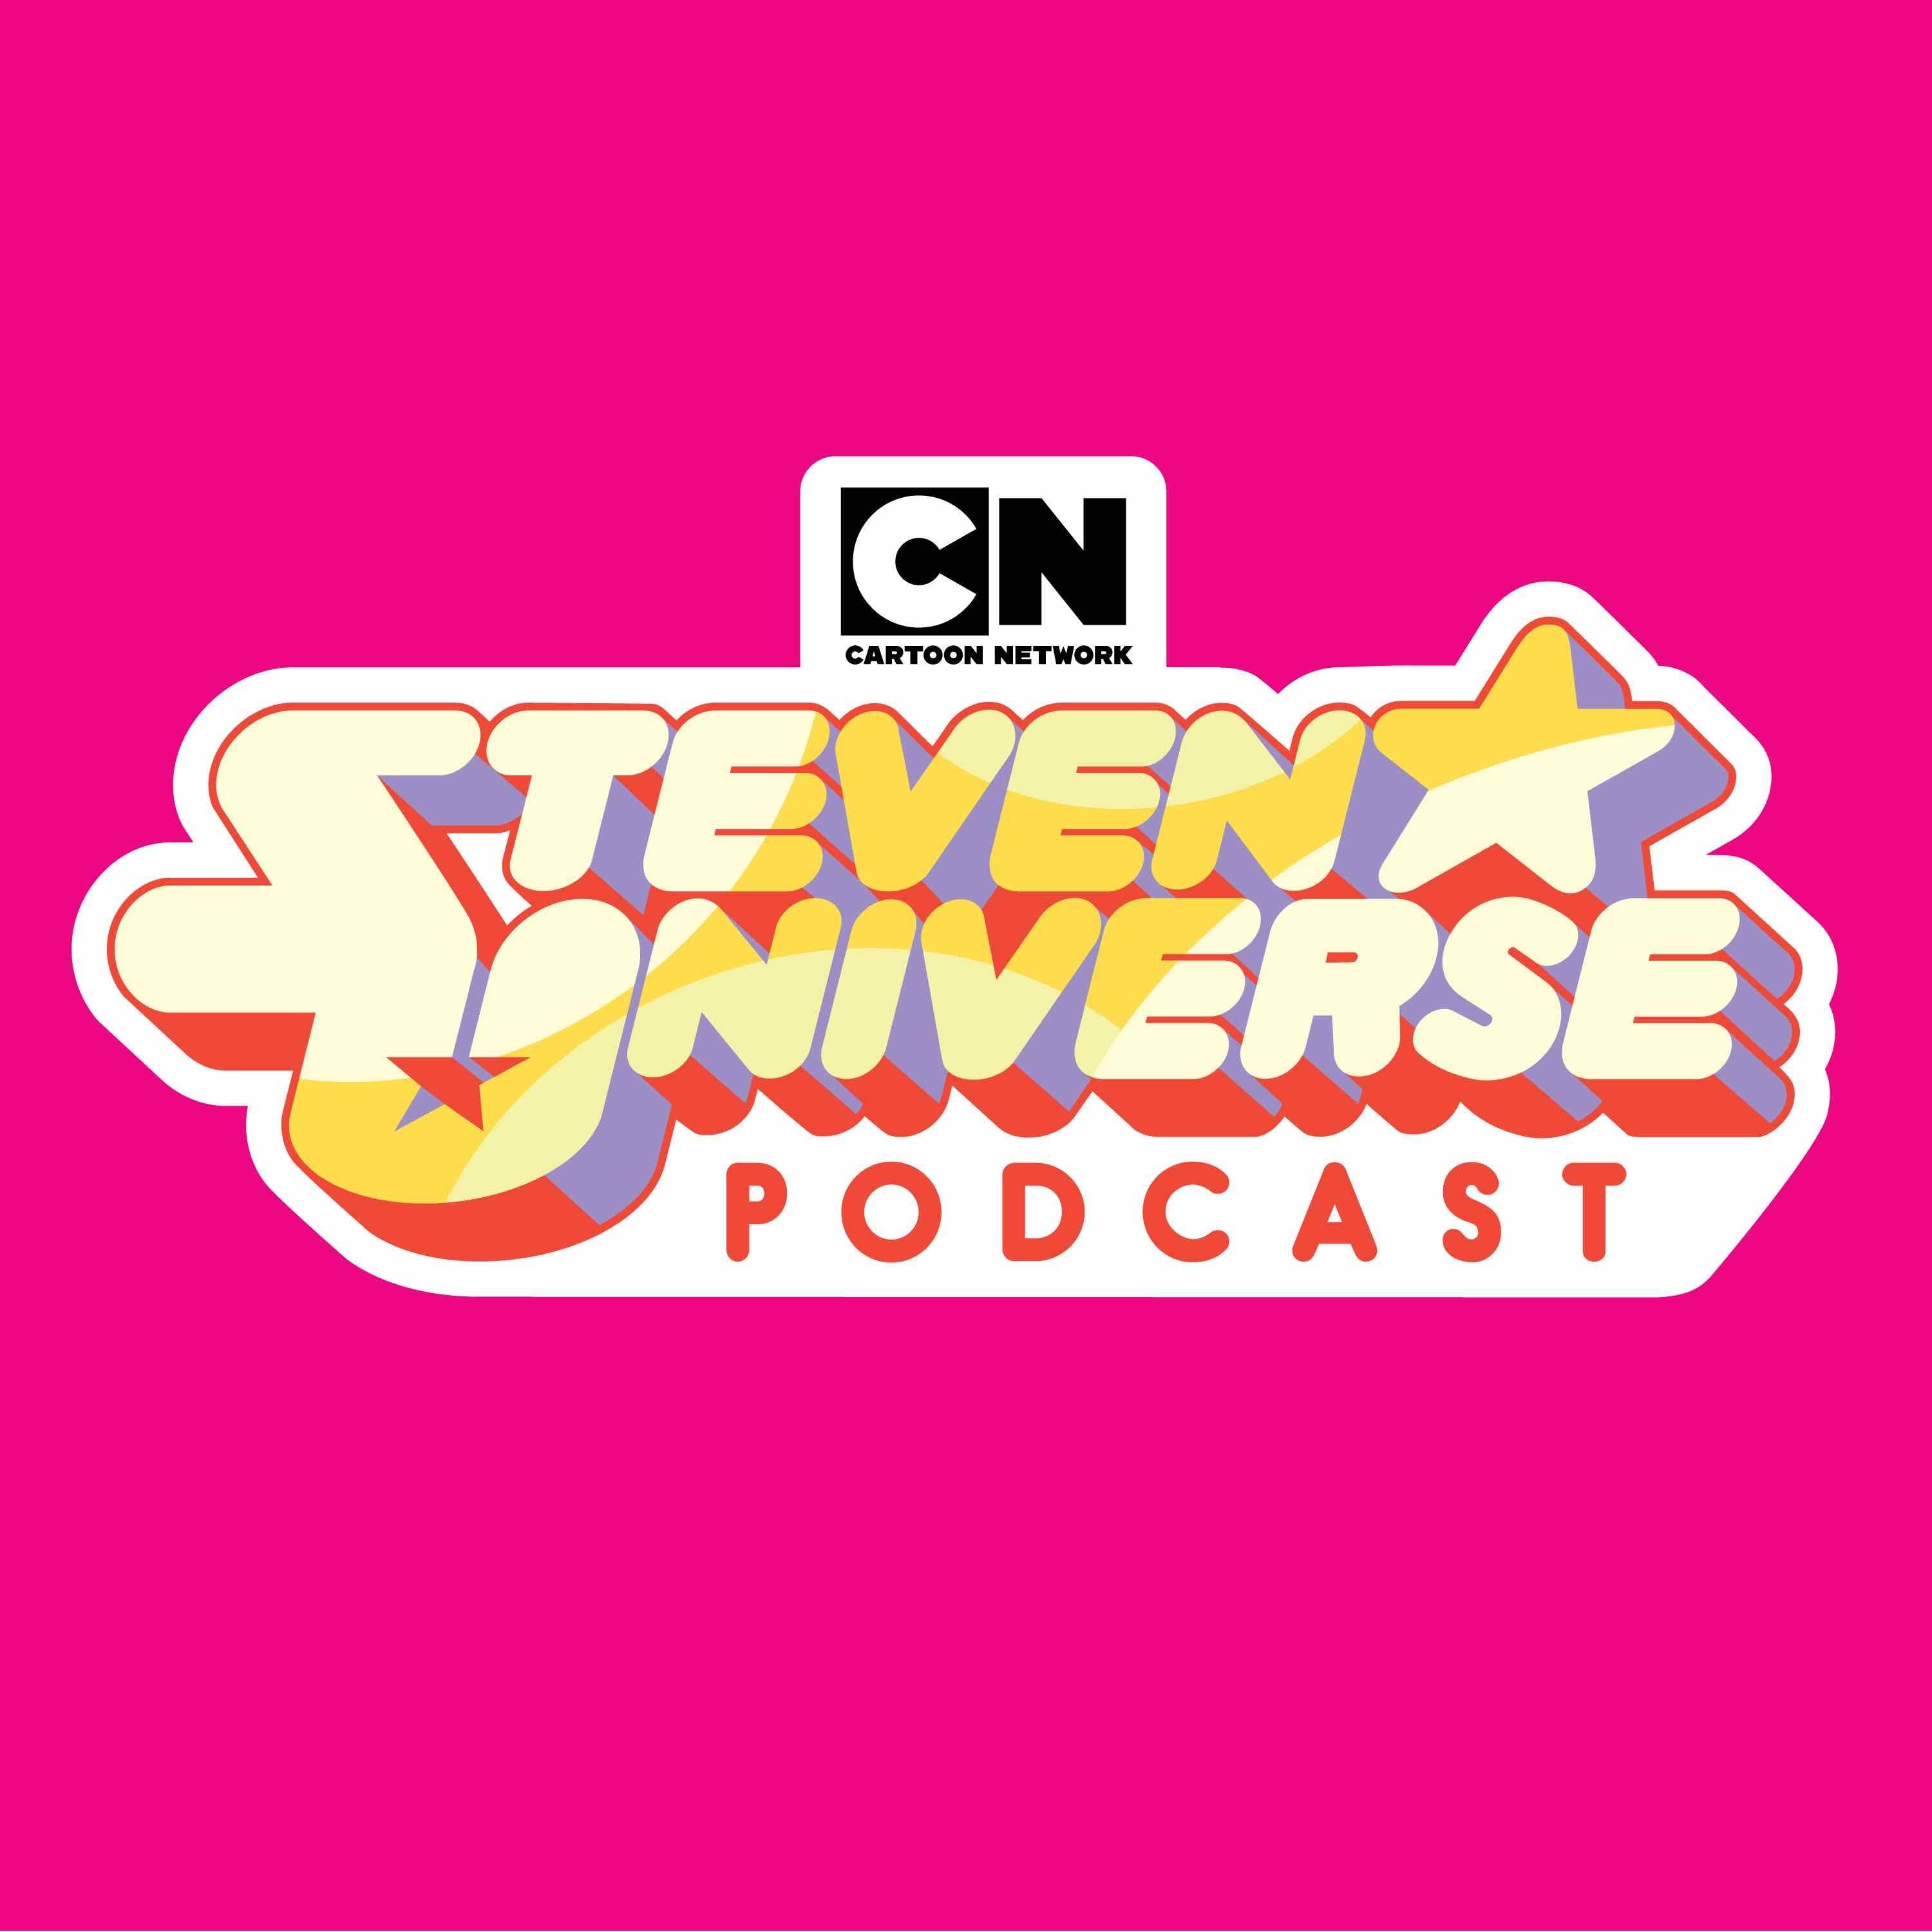 A Maroon Cartoon Logo - The Steven Universe Podcast by Cartoon Network on Apple Podcasts